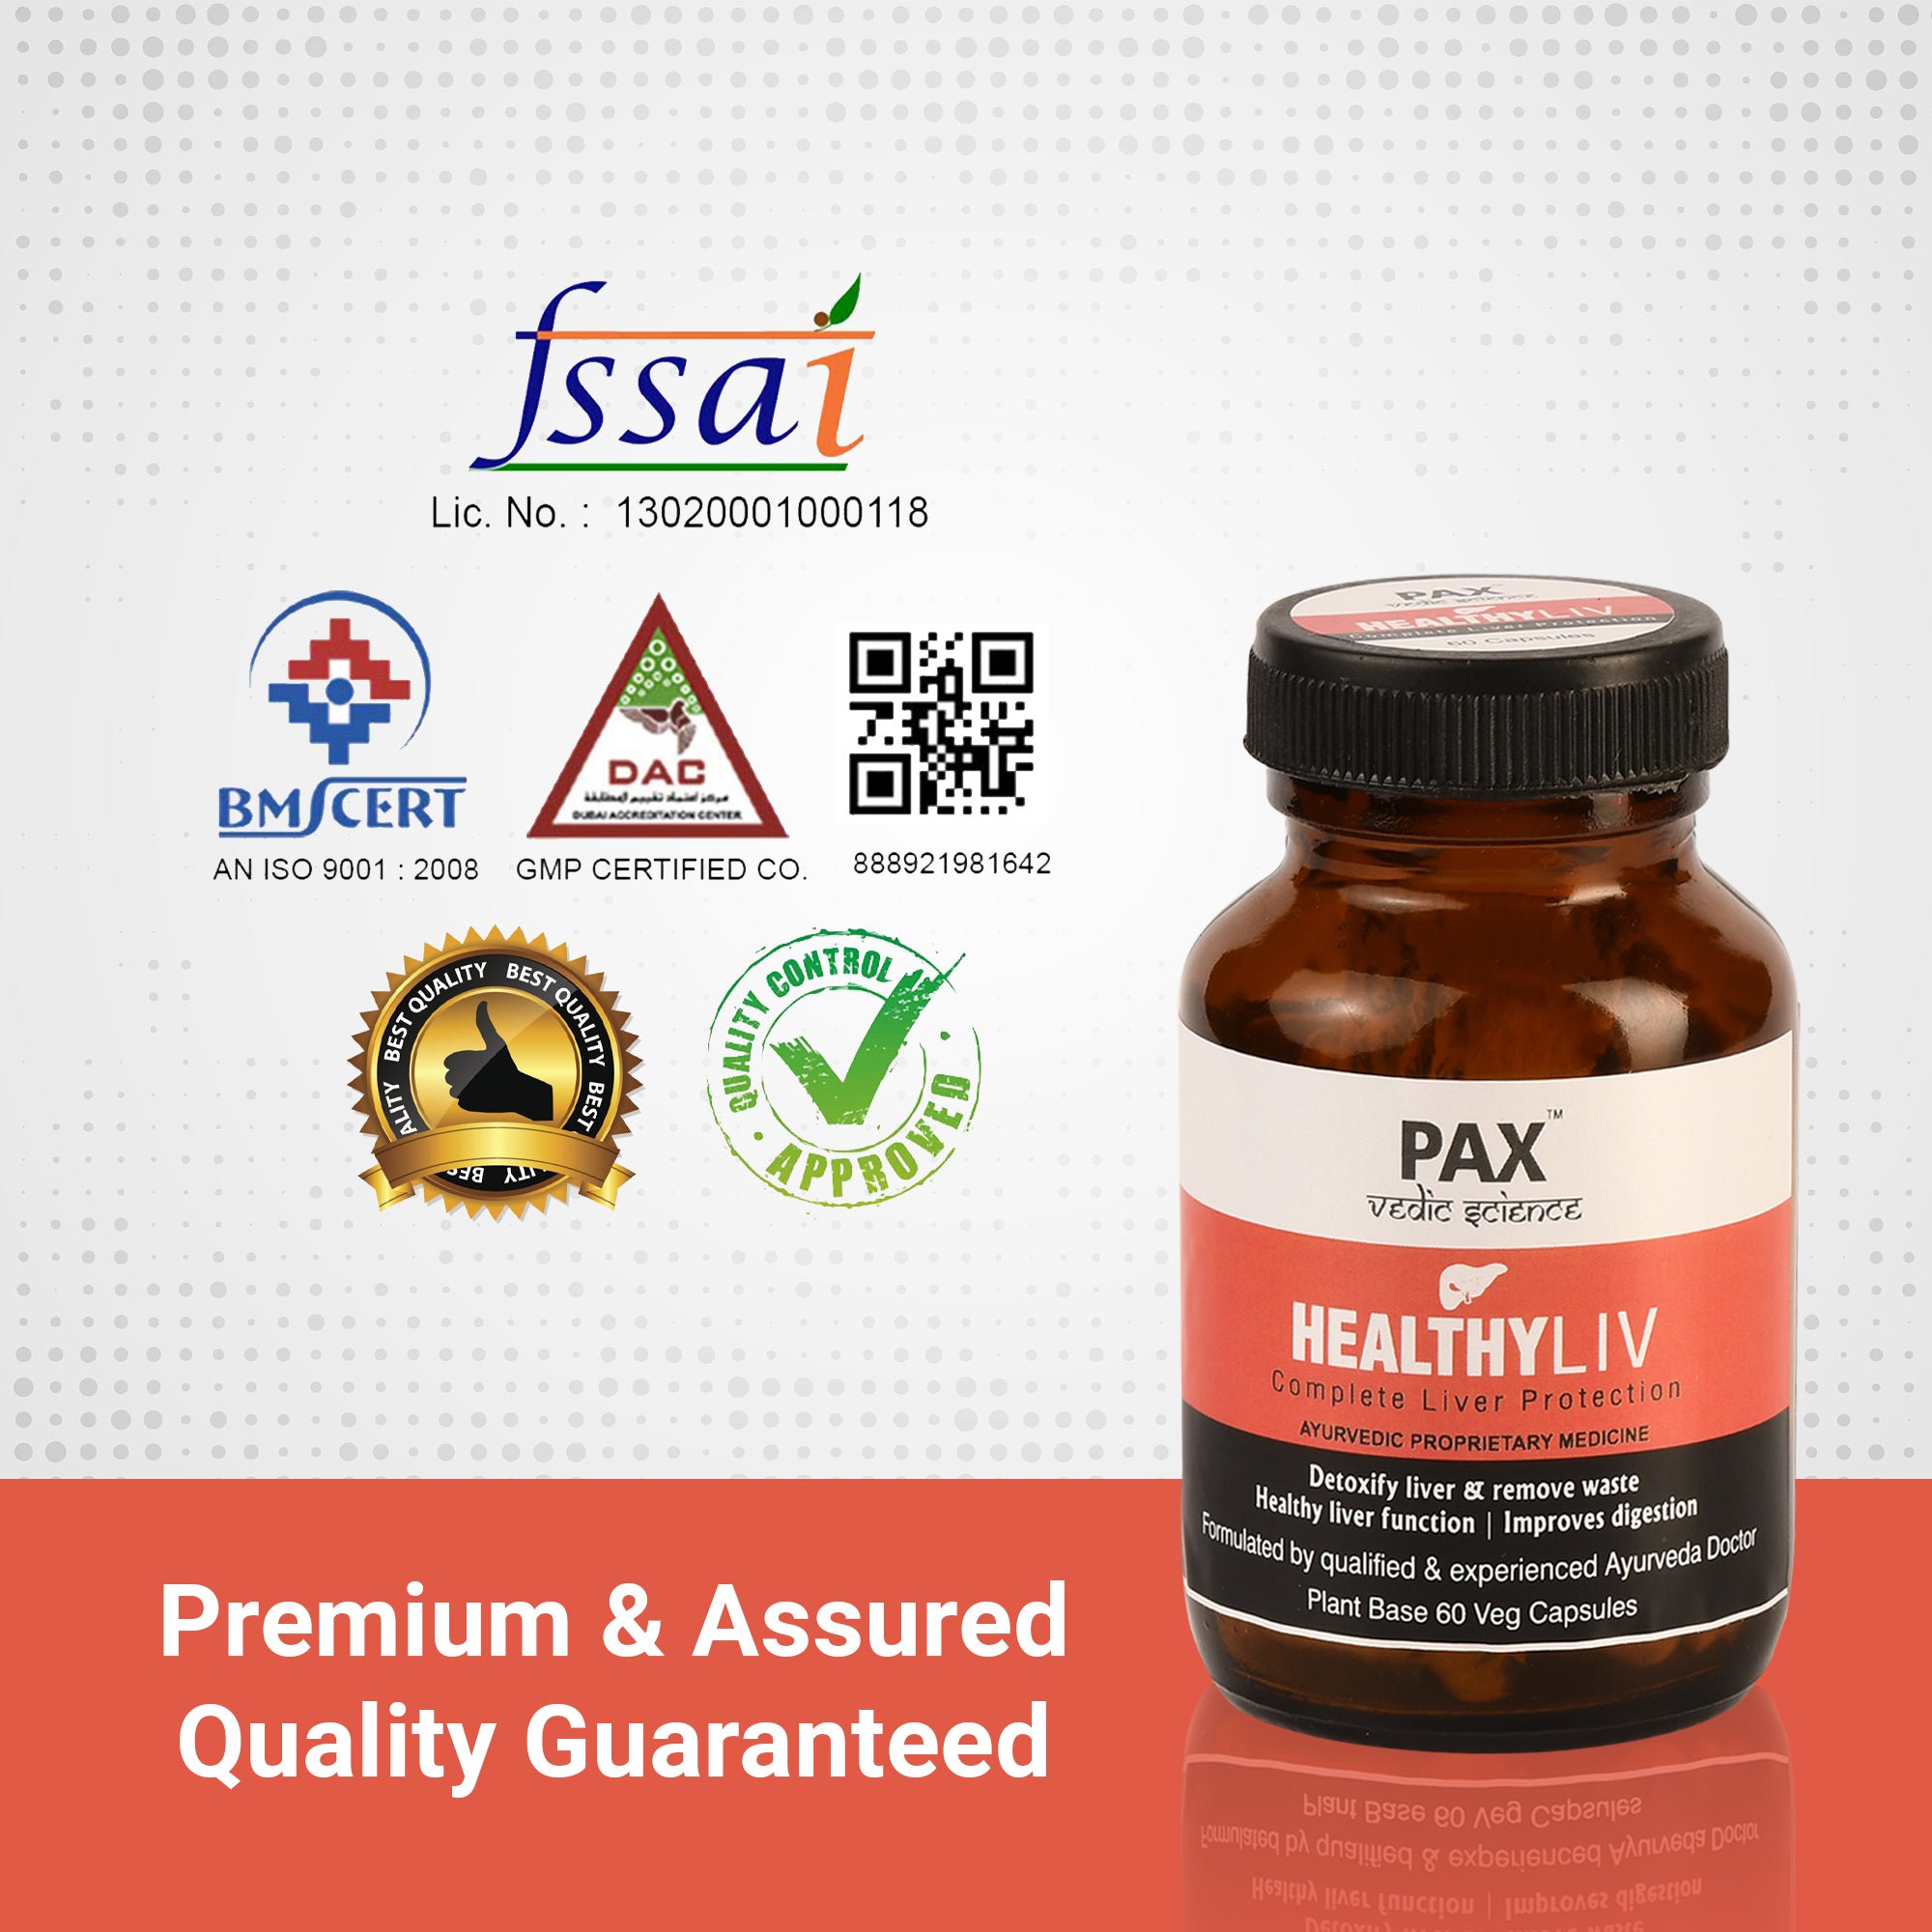 Pax Vedic Science Healthy Liv Capsule for complete Liver Protection, Detoxify Liver and Improve Digestion - 60 capsules